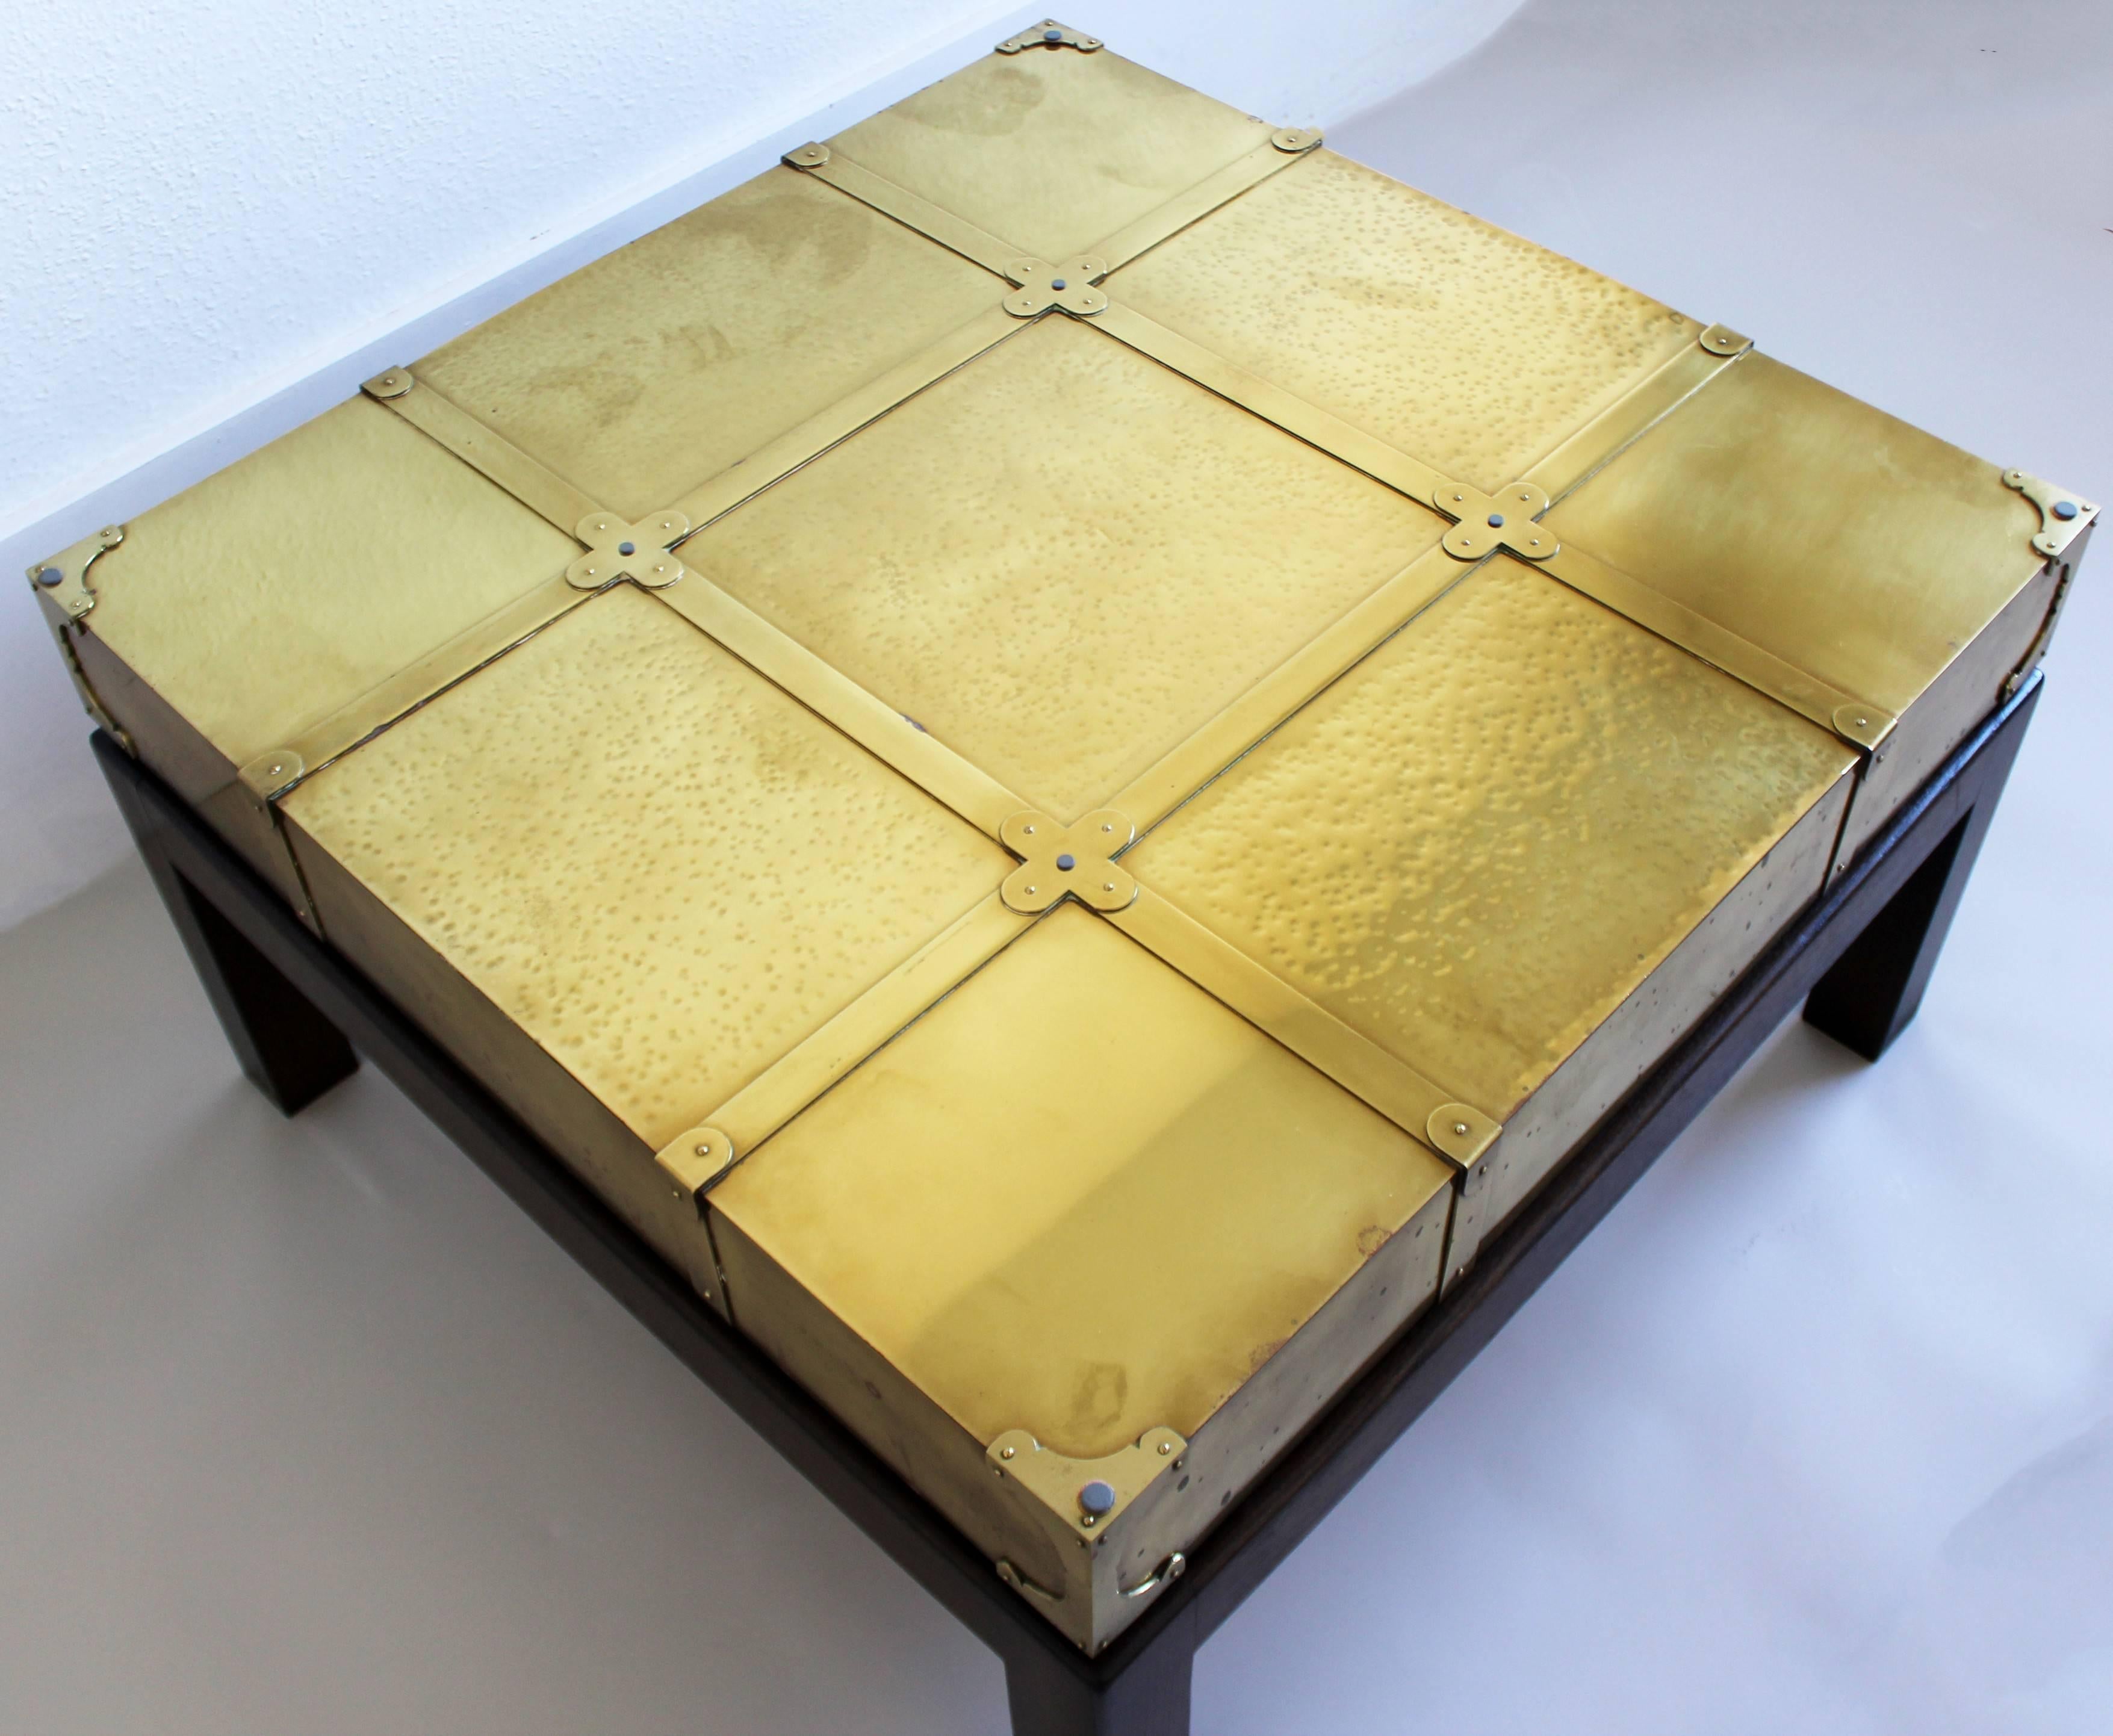 For your consideration is a beautiful, brass coffee table, on a wooden base and with a glass top, by Sarreid Ltd. of Spain, with original tags. In good vintage condition. The dimensions are 30.5" W Sq x 17.5" H.